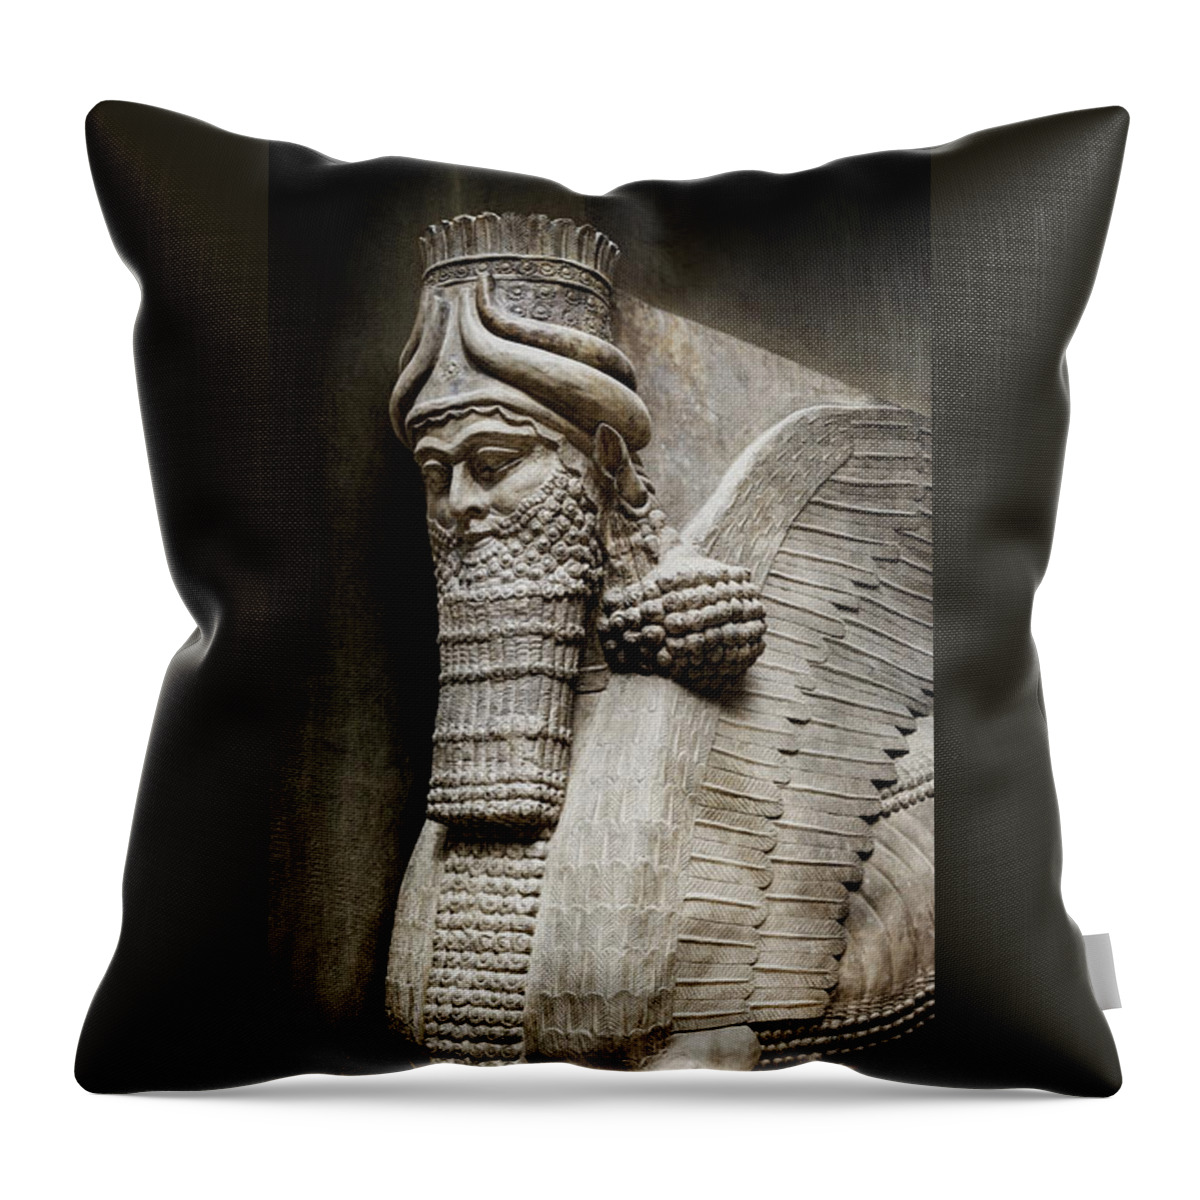 Assyrian Human Headed Winged Bull Throw Pillow featuring the photograph Assyrian Human-headed Winged Bull by Weston Westmoreland